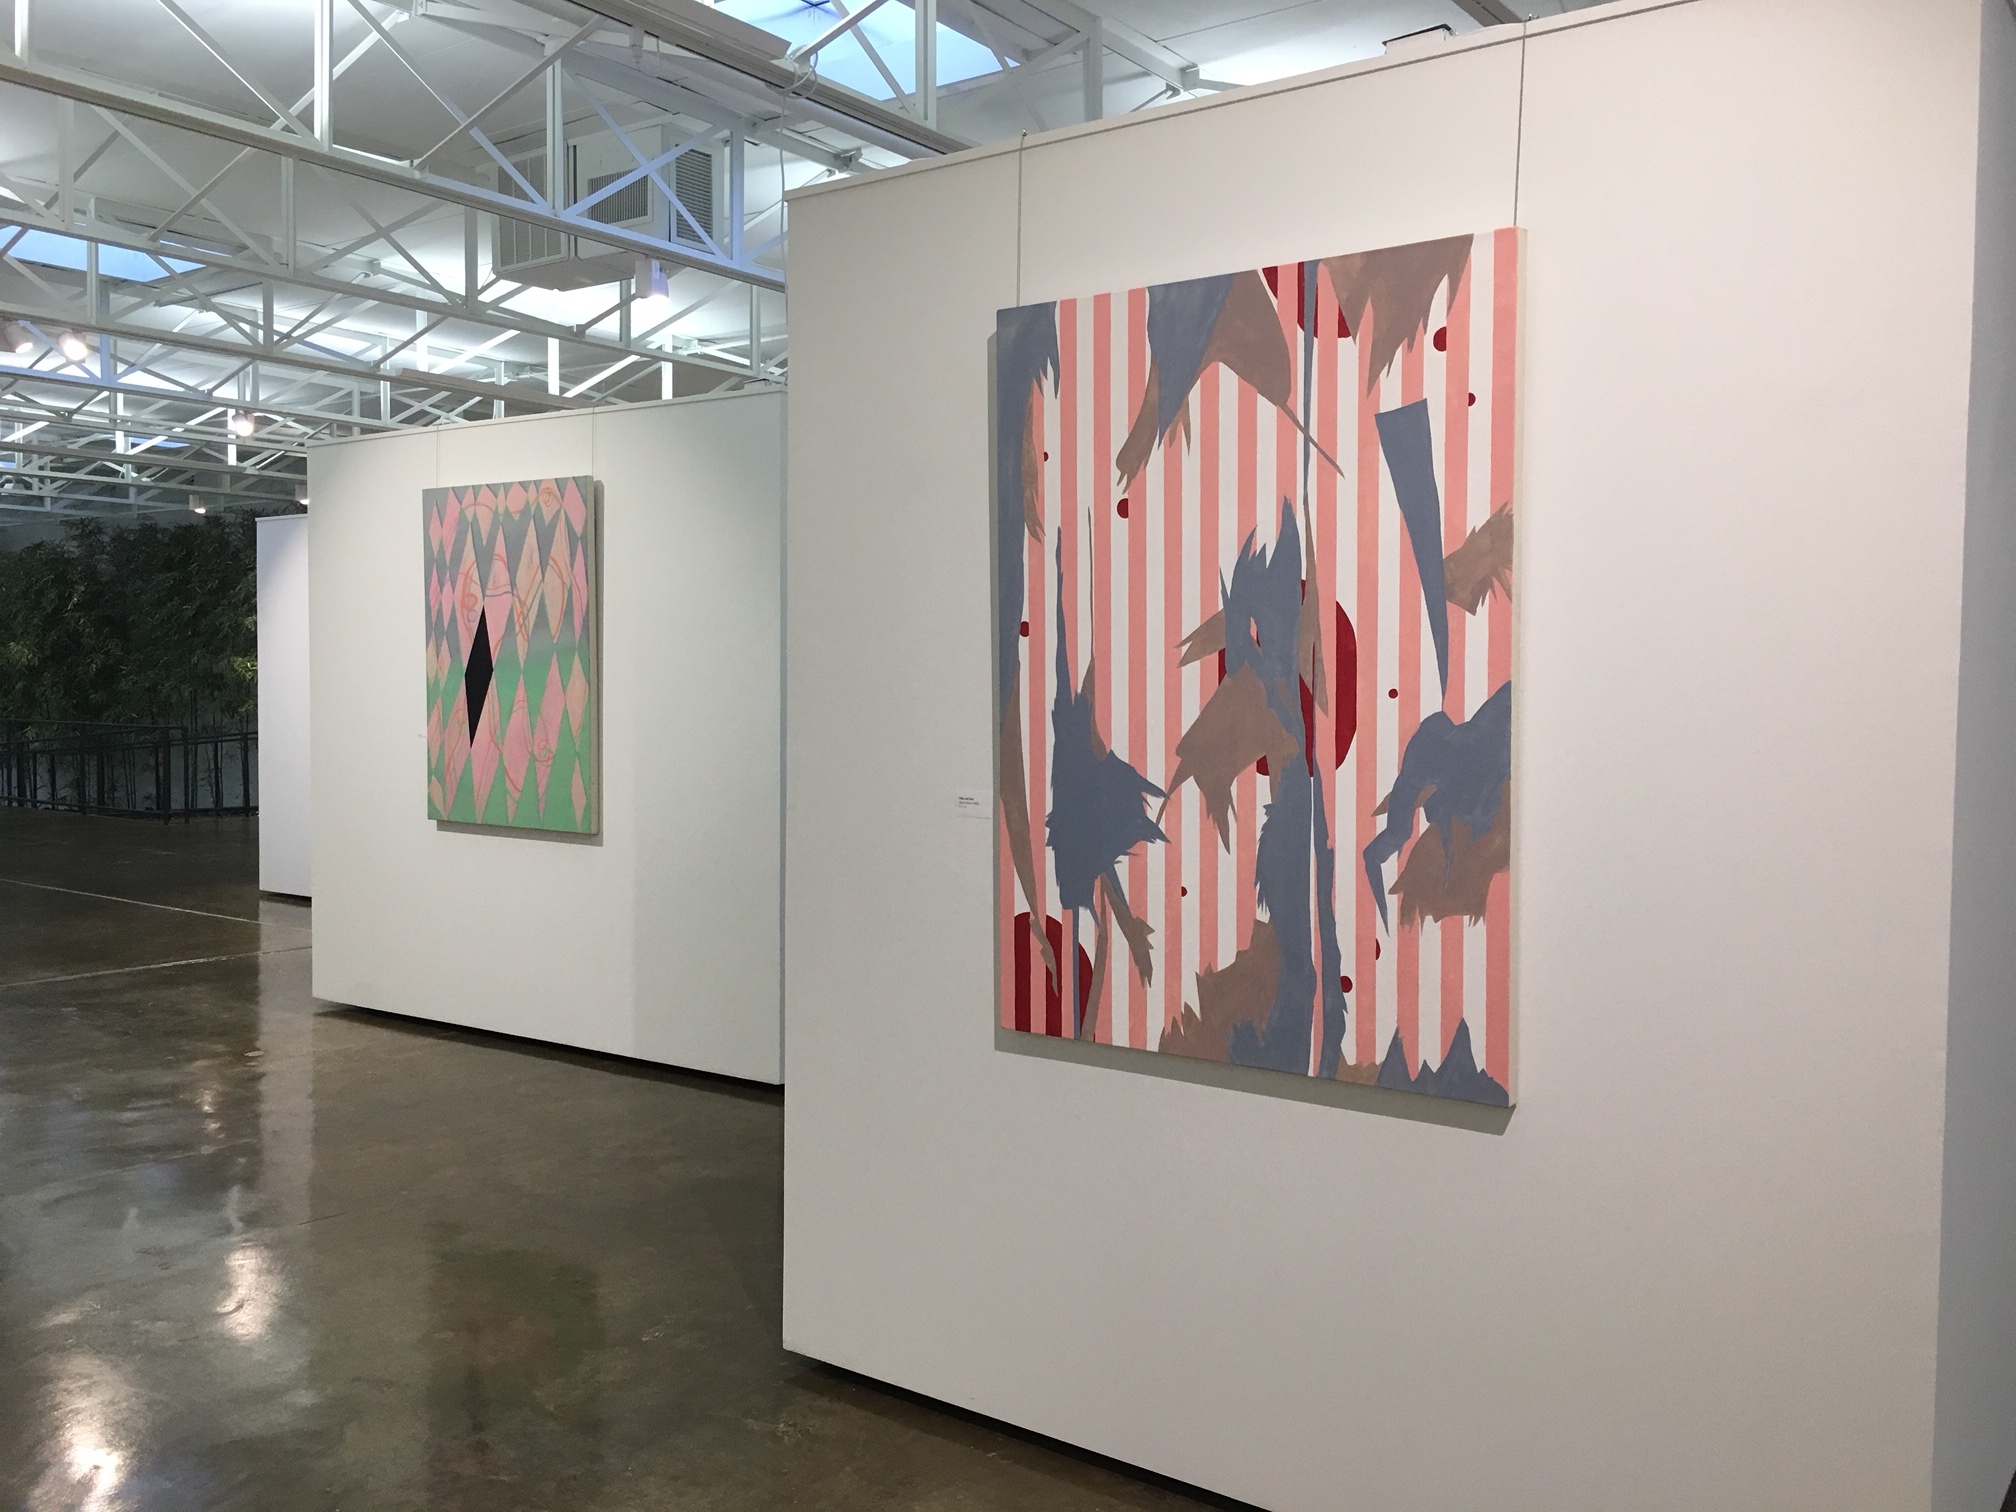  Installation view at Sherle Wagner Art Gallery, Dallas, TX, 12/2016-2/2017 